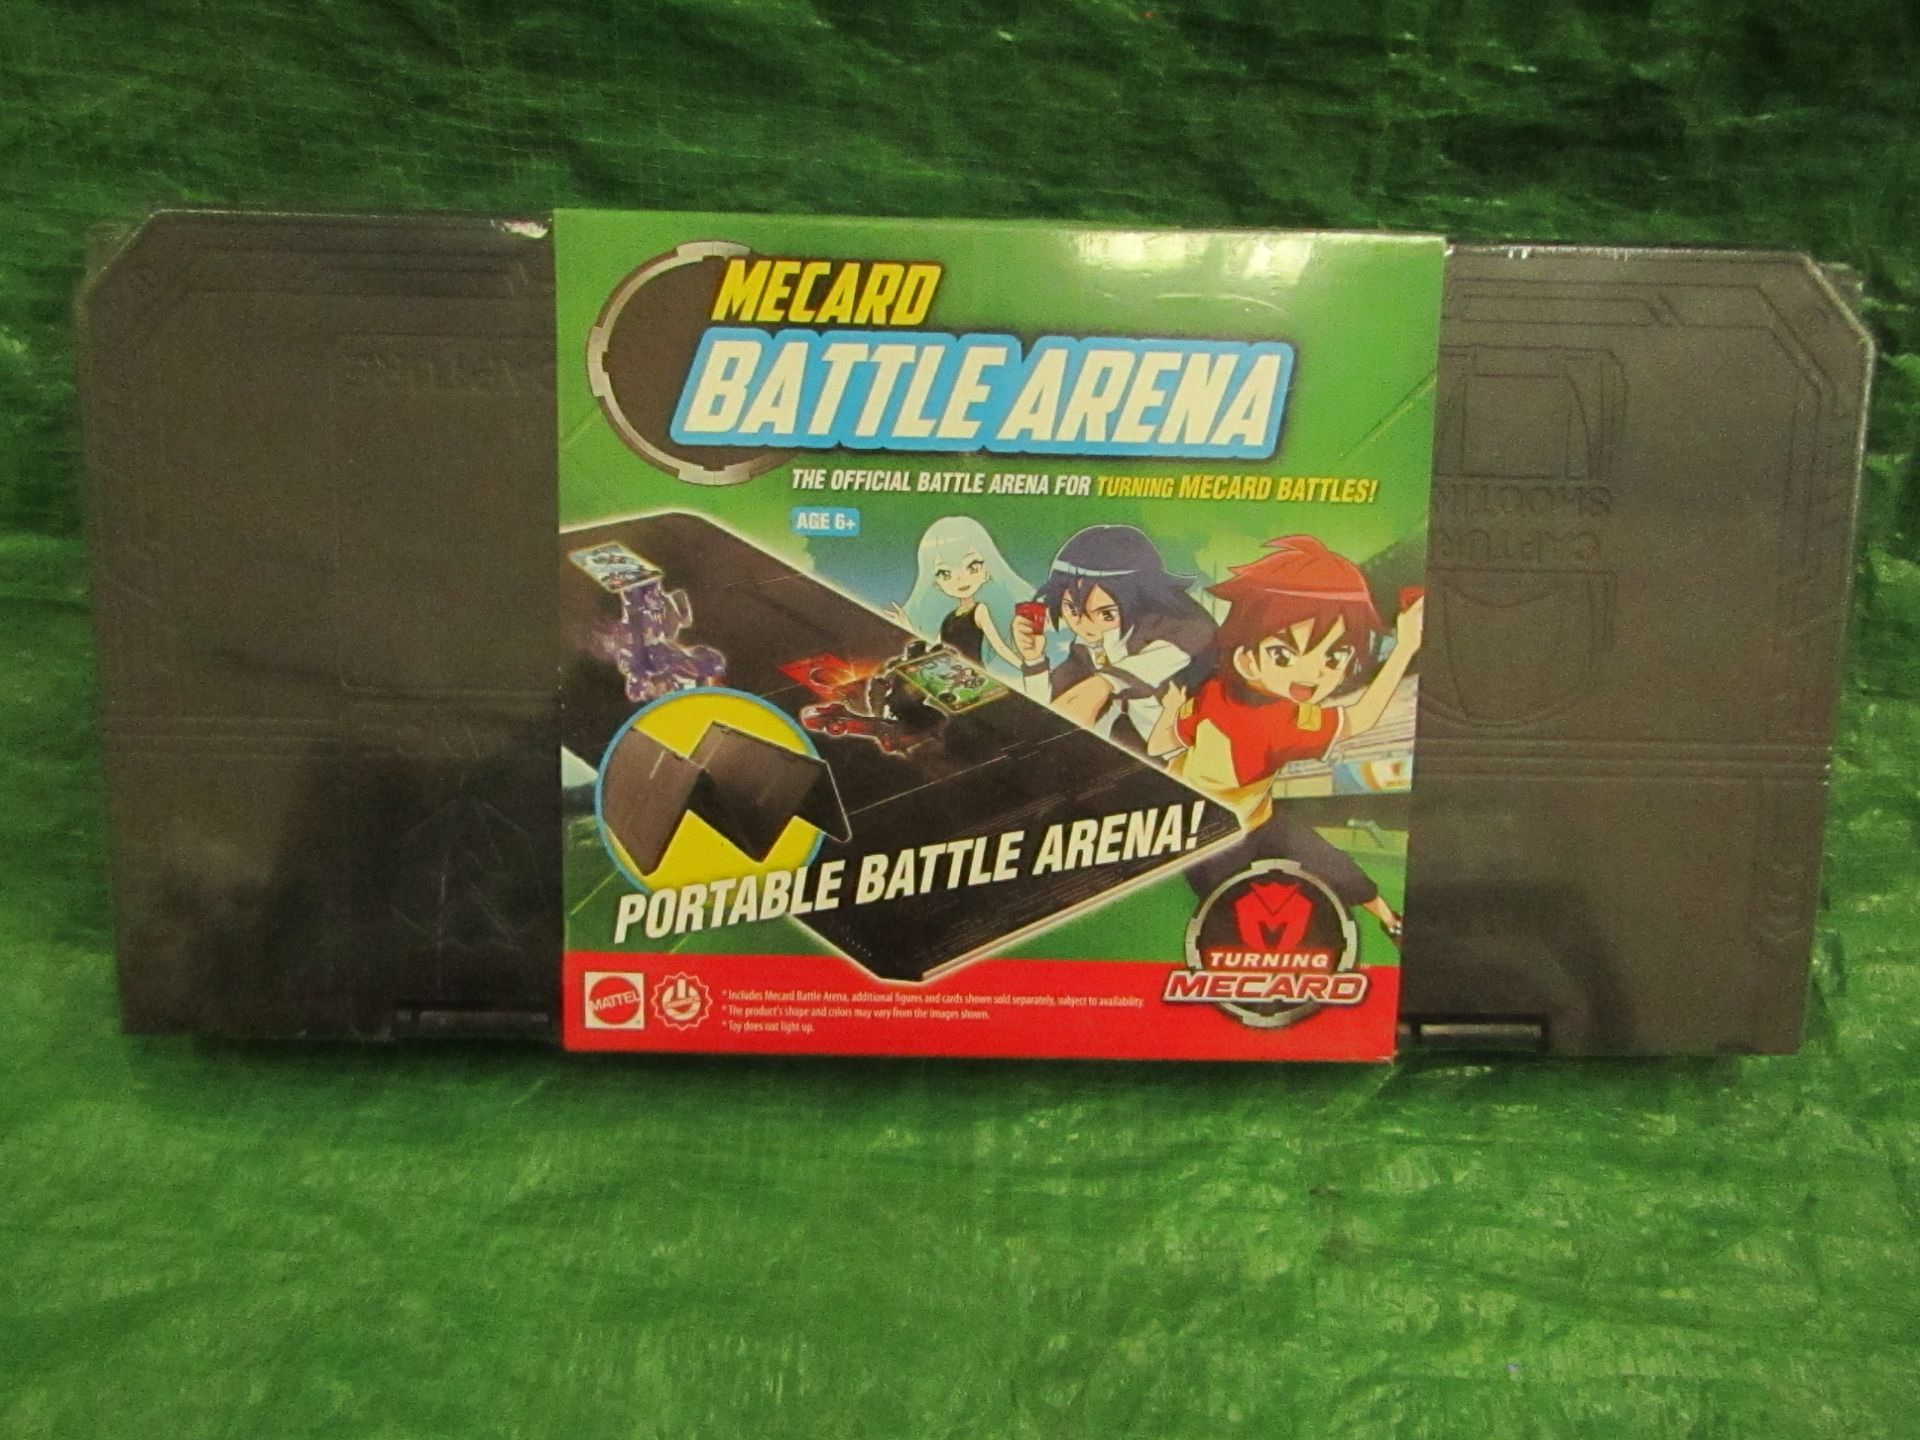 5x Boxes of 6 Units Being : Choirock Turning Mecard - Mecard Battle Arena - New & Boxed.